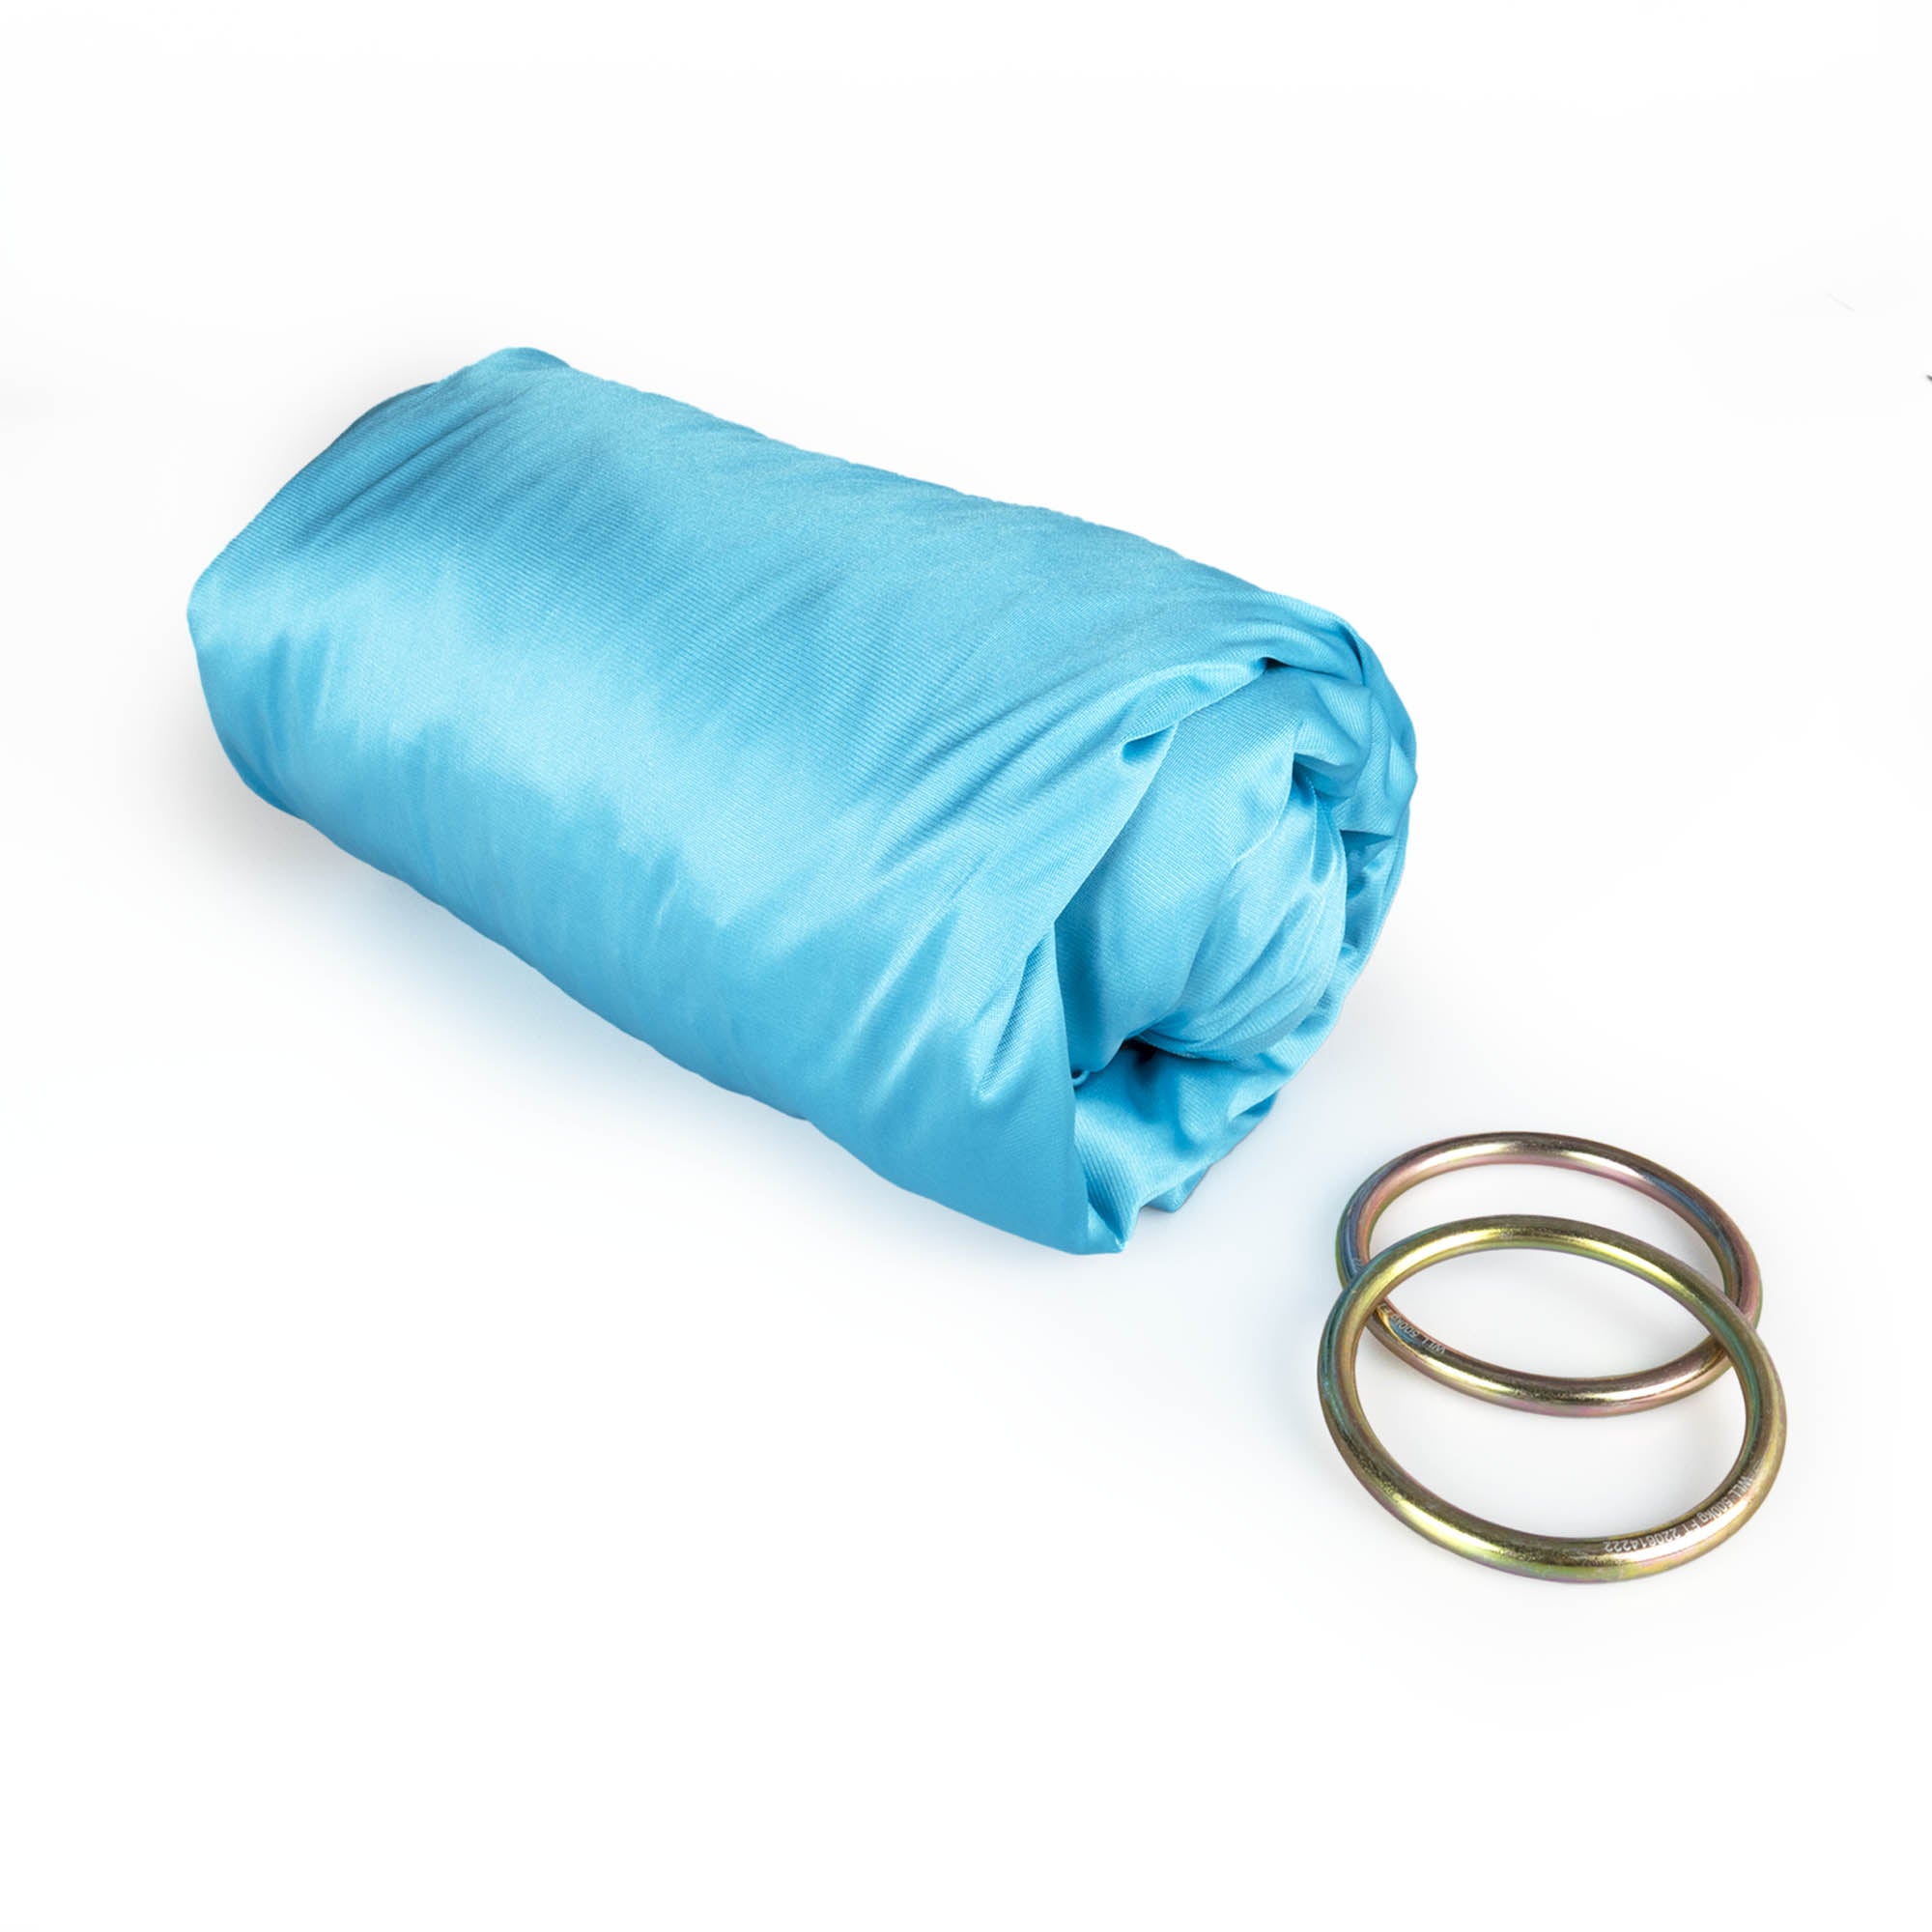 Turquoise yoga hammock with O rings detached